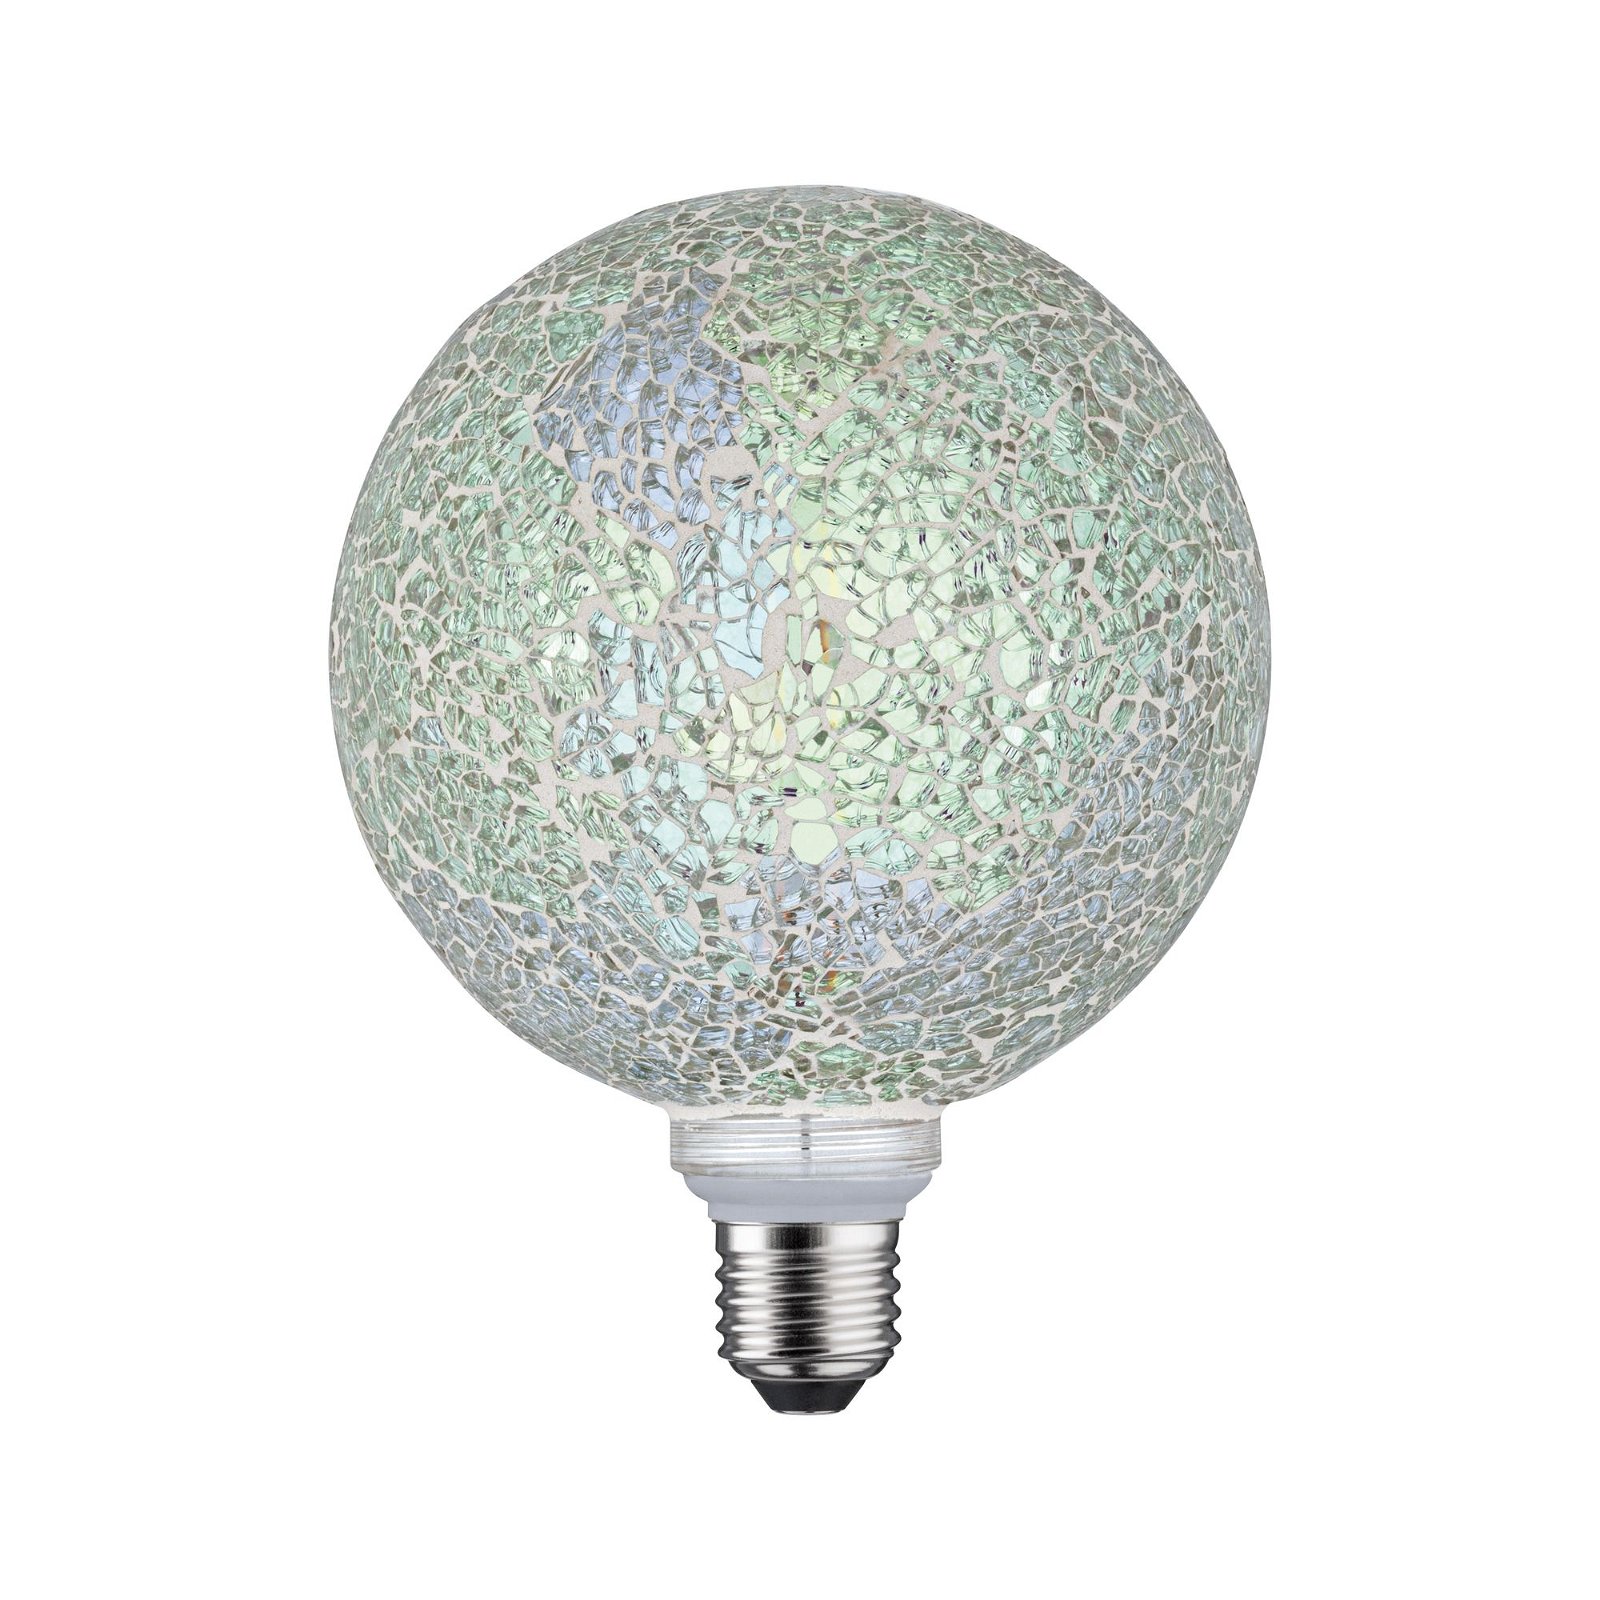 Miracle Mosaic Edition 230 V Standard LED Globe G125 E27 470lm 5W 2700K dimmable White